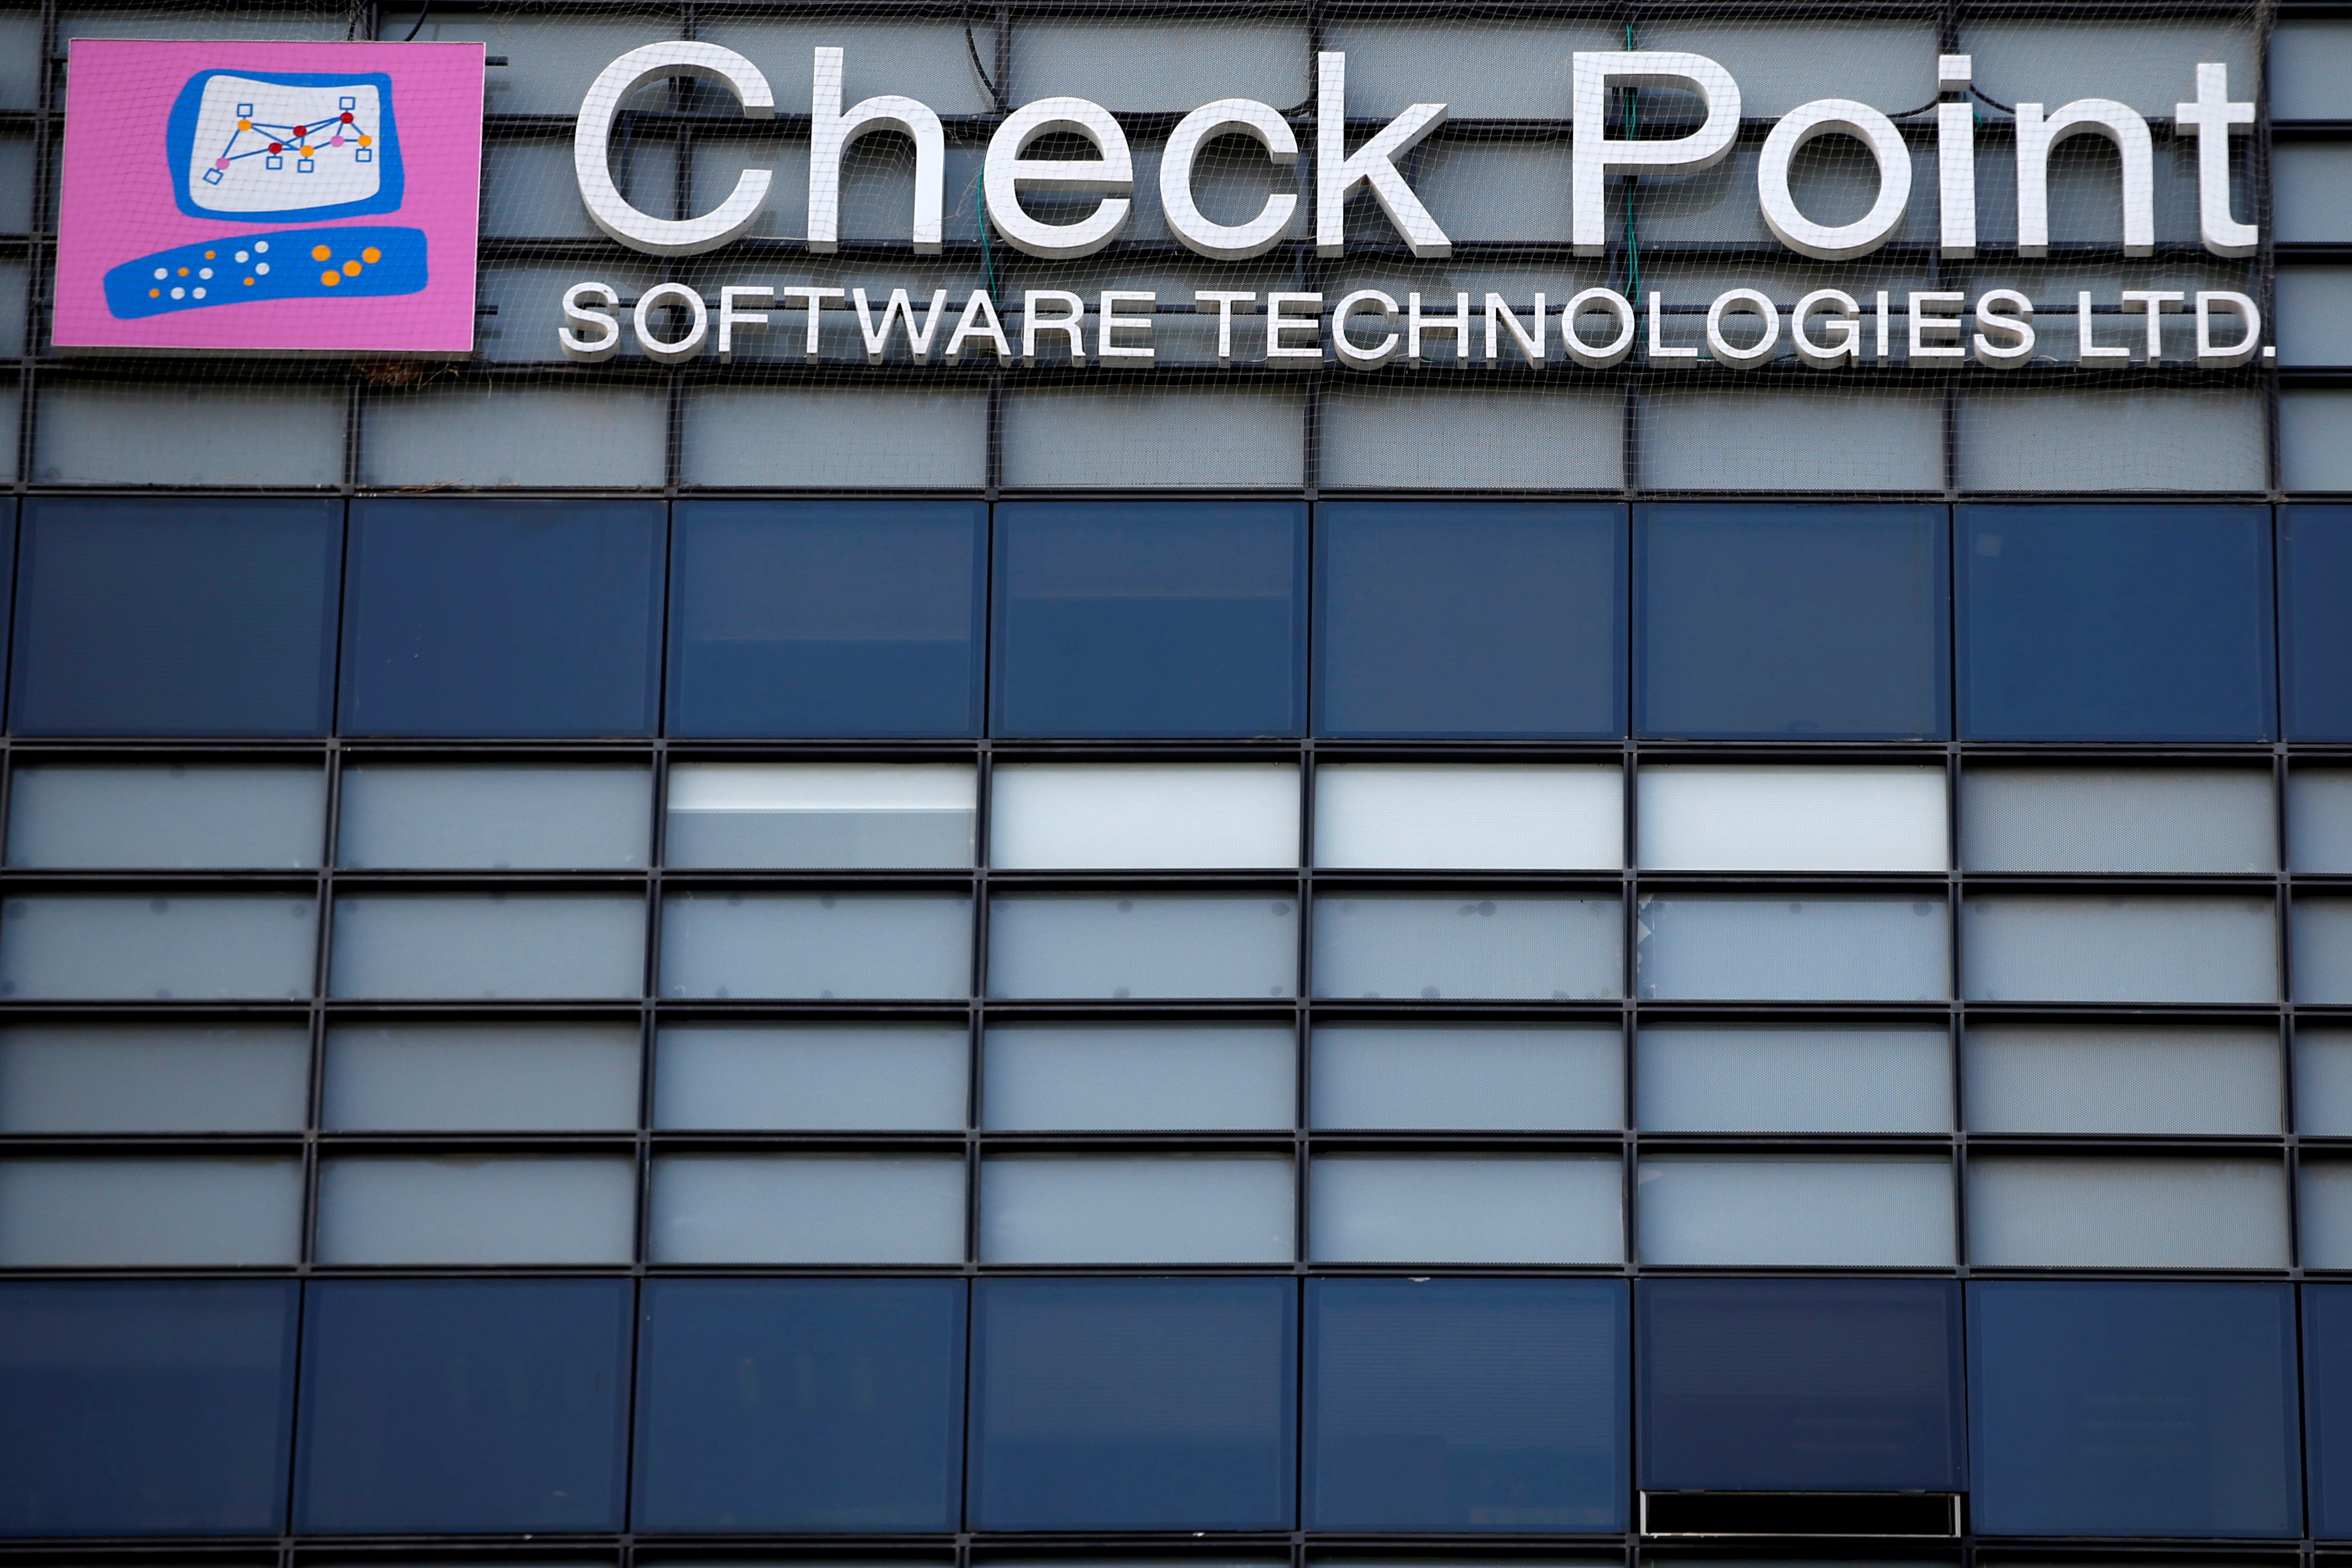 The logo of network security provider Check Point Software Technologies Ltd is seen at their headquarters in Tel Aviv, Israel August 14, 2016. Picture taken August 14, 2016. REUTERS/Baz Ratner